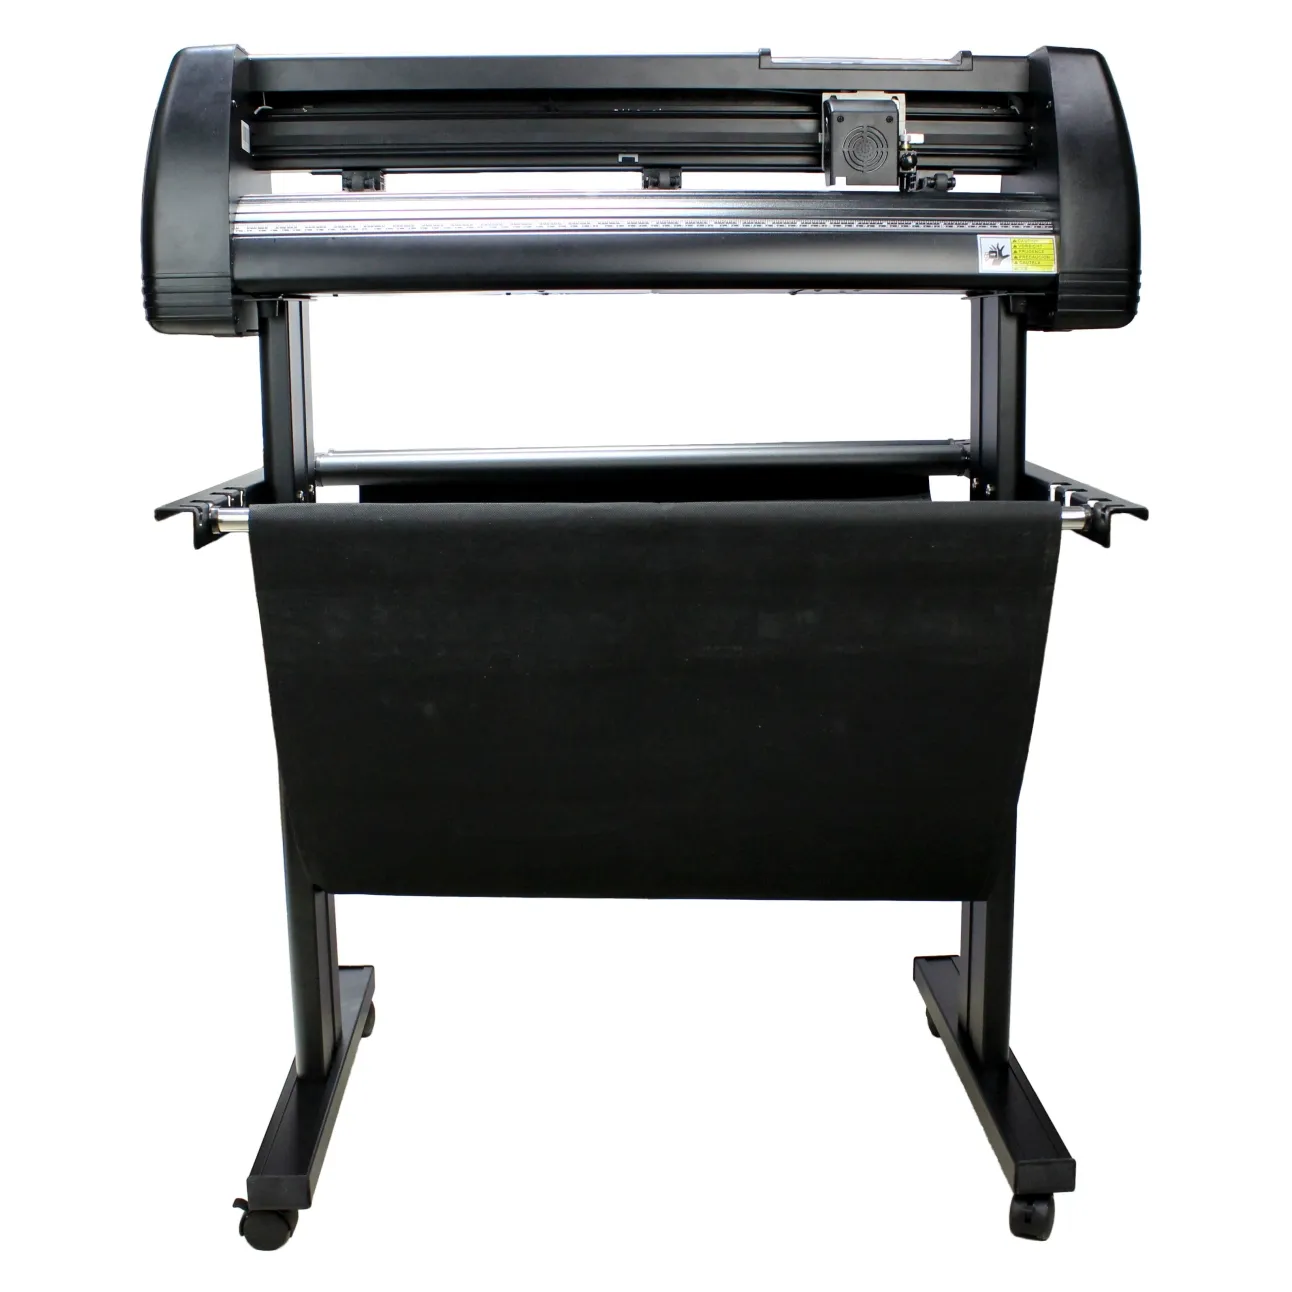 SignMaster Software-Enabled Vinyl Cutter Plotter with Stepper Motor Driver Efficient Machine for Cutting Vinyl